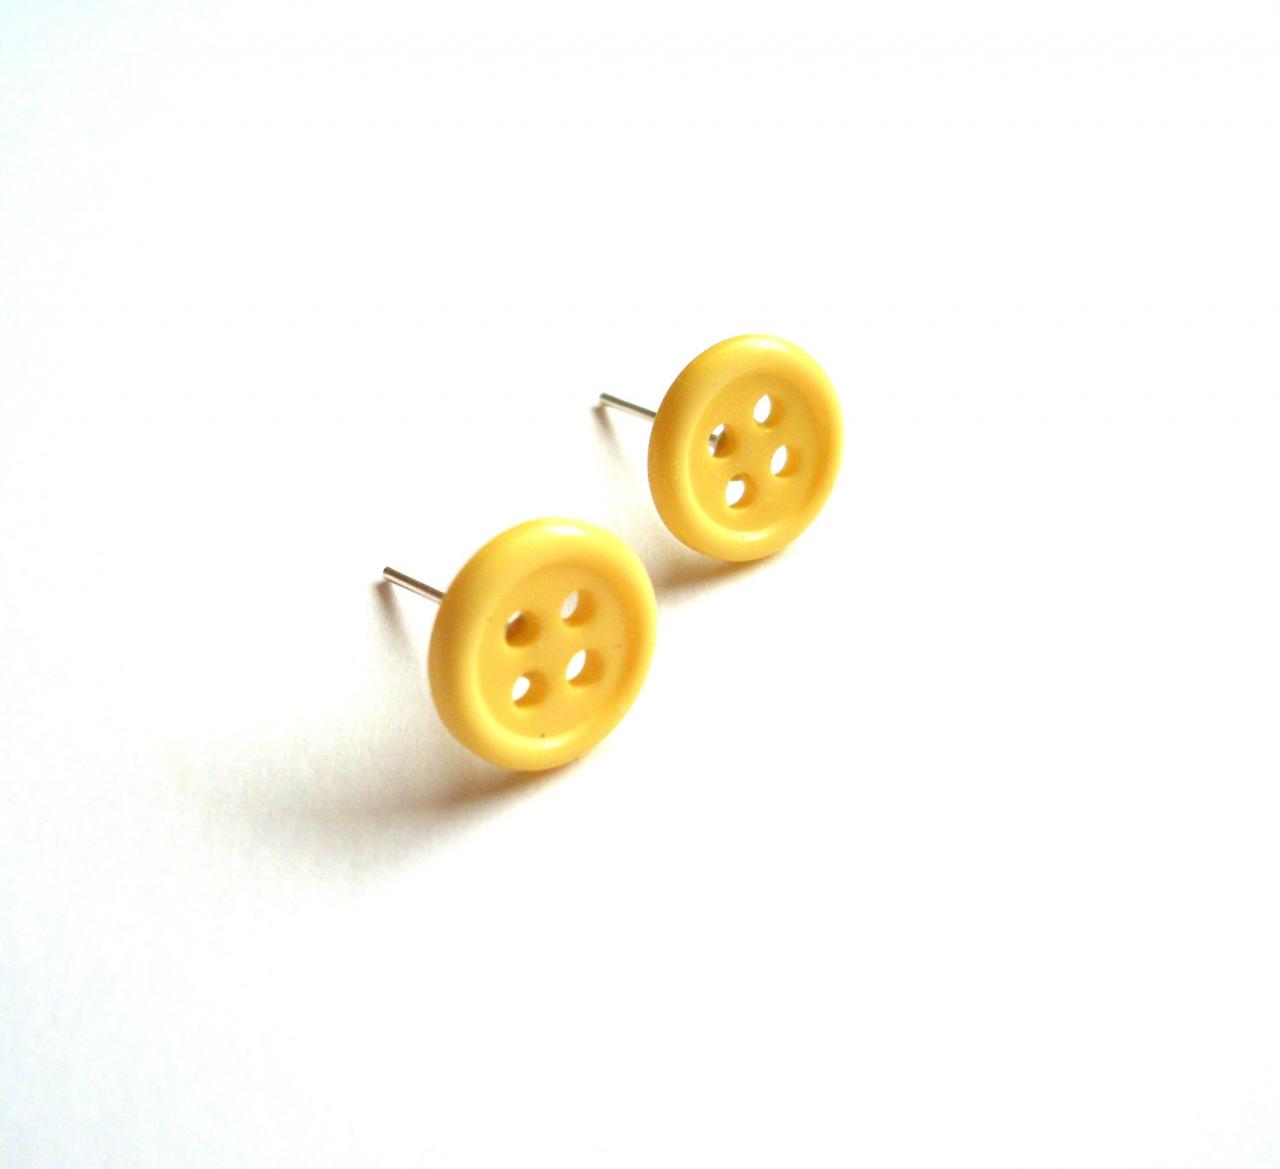 Yellow Post Earrings Made Of Repurposed Buttons - Upcycled Recycled Jewelry, Ecofriendly, Minimalist, Kitsch